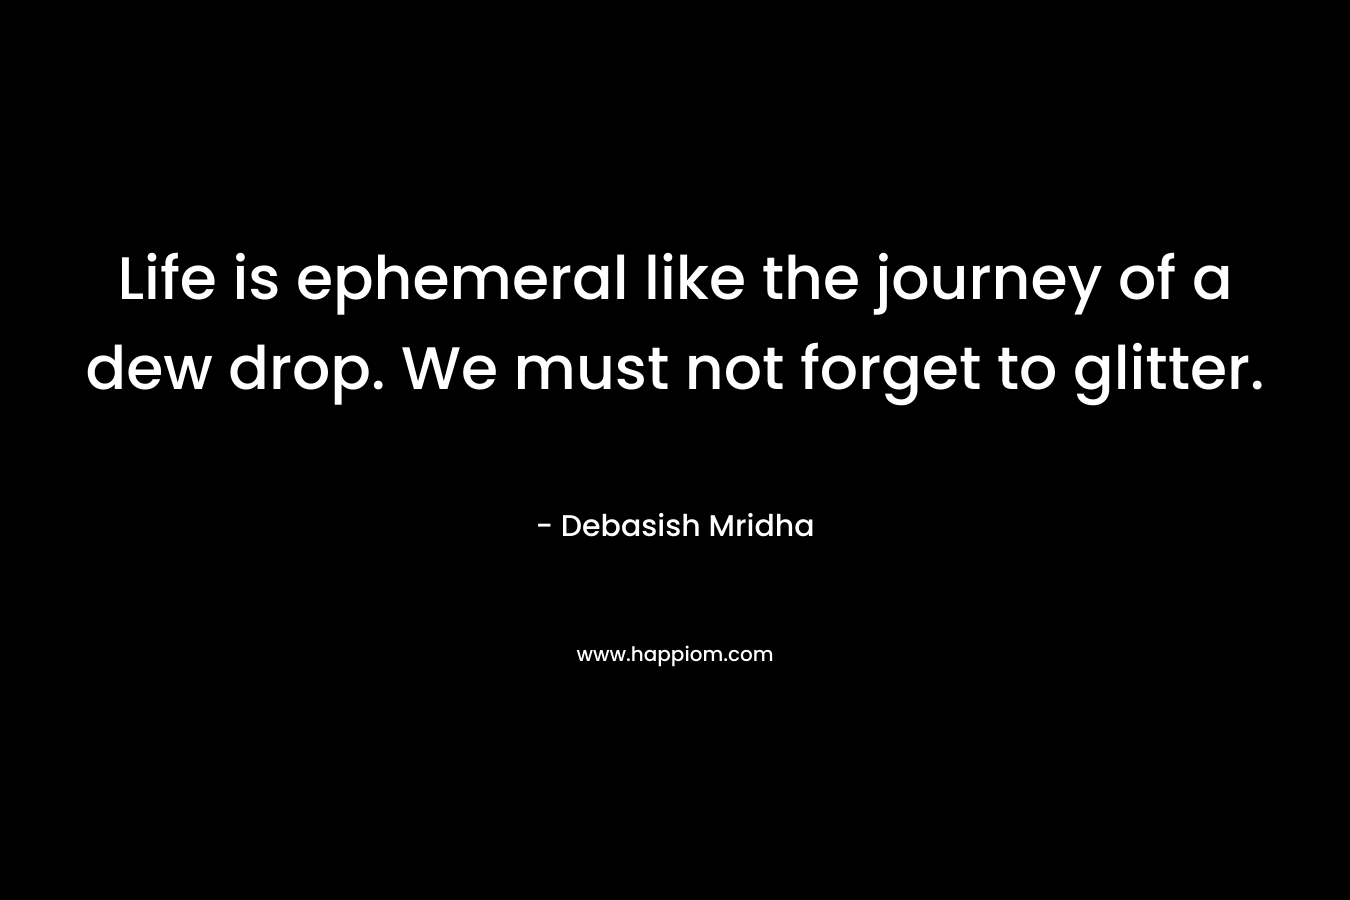 Life is ephemeral like the journey of a dew drop. We must not forget to glitter. – Debasish Mridha